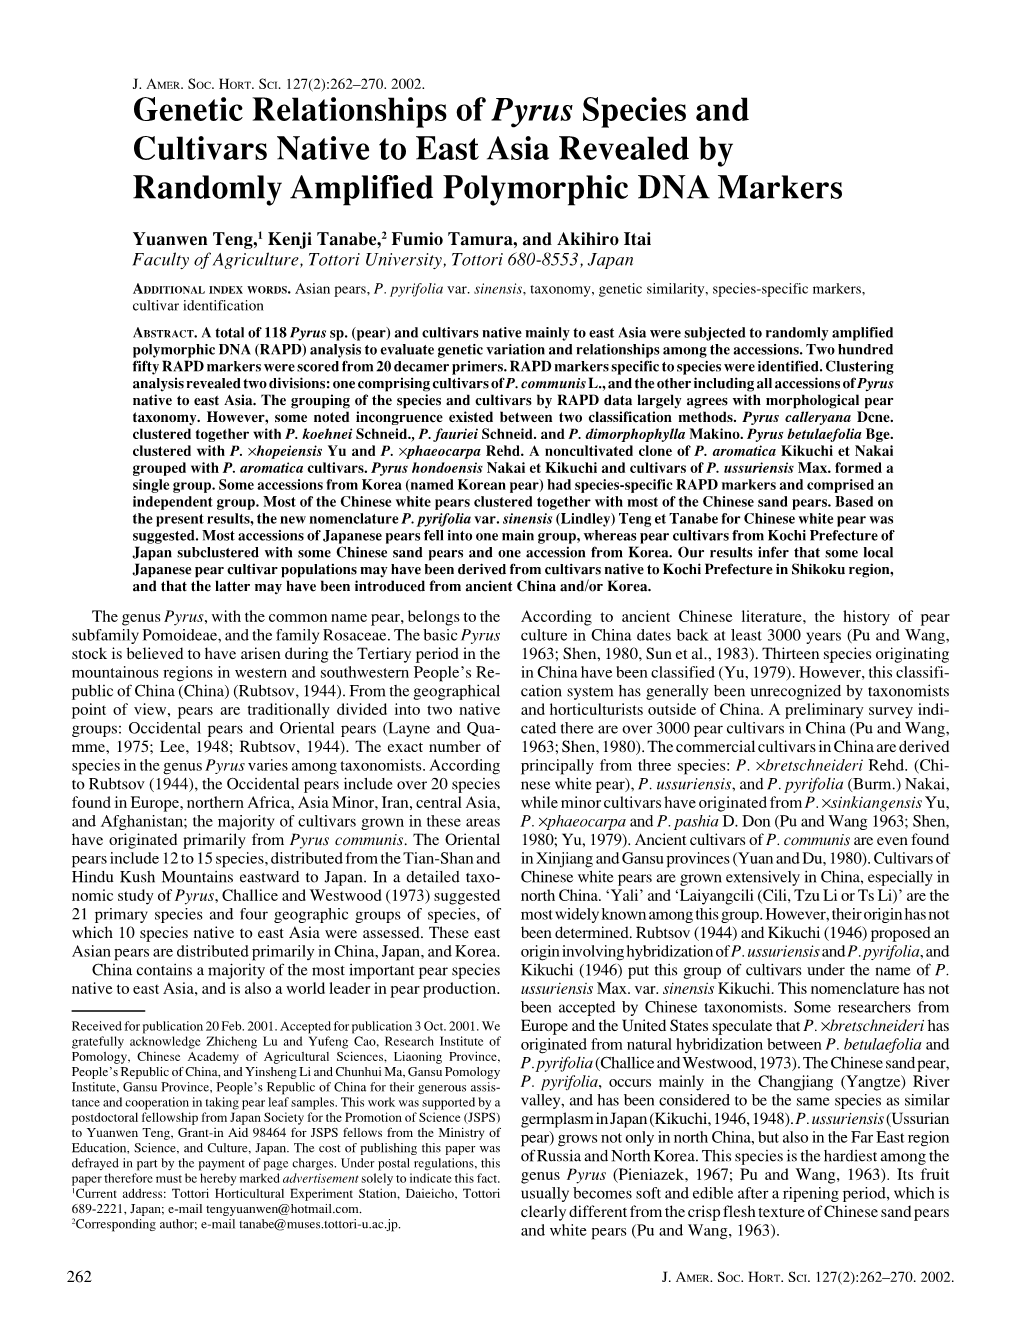 Genetic Relationships of Pyrus Species and Cultivars Native to East Asia Revealed by Randomly Amplified Polymorphic DNA Markers